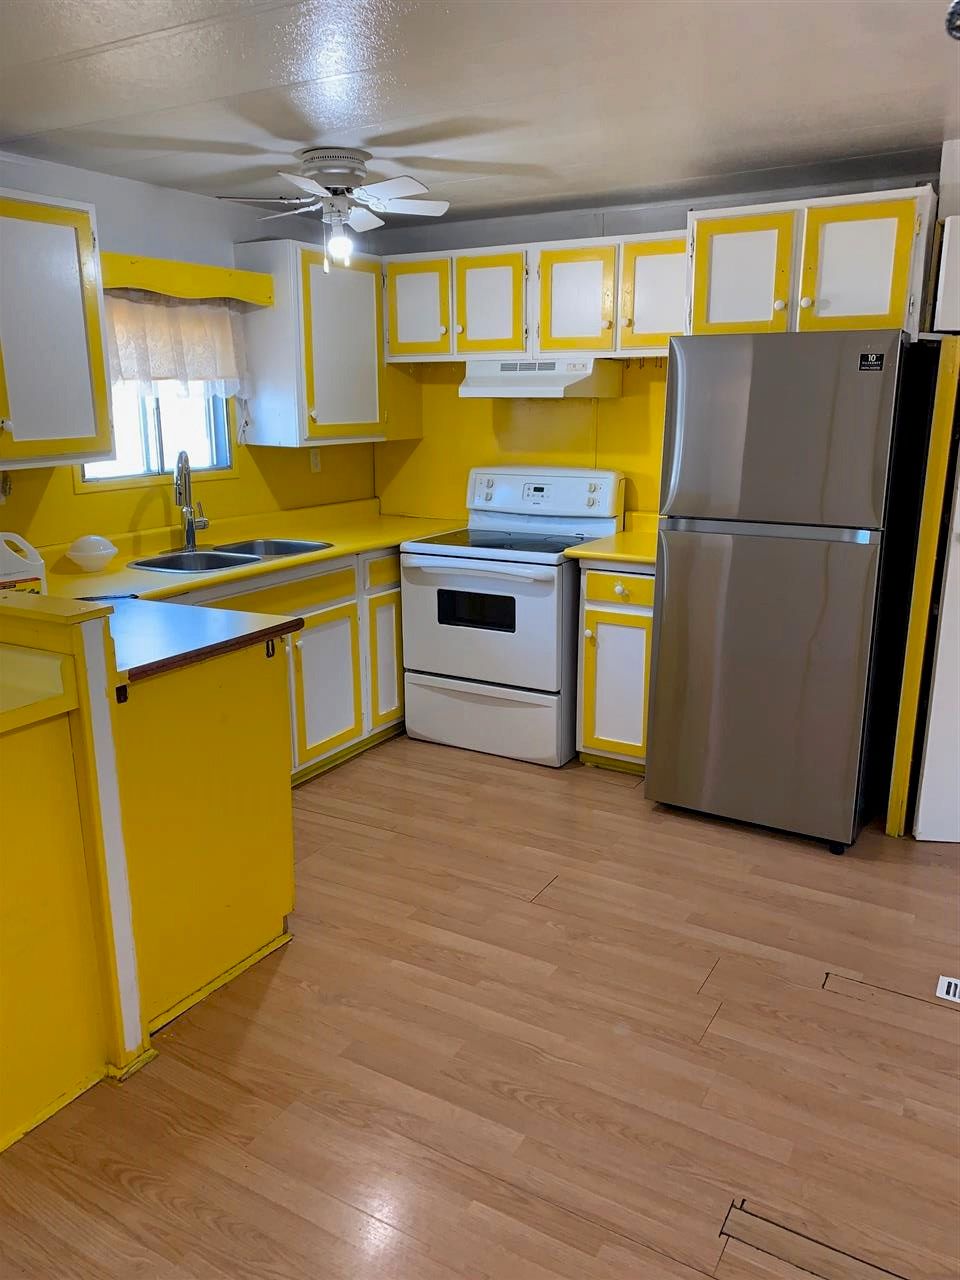 Photo 18: Photos: 10356 99 Street: Taylor Manufactured Home for sale (Fort St. John (Zone 60))  : MLS®# R2542502